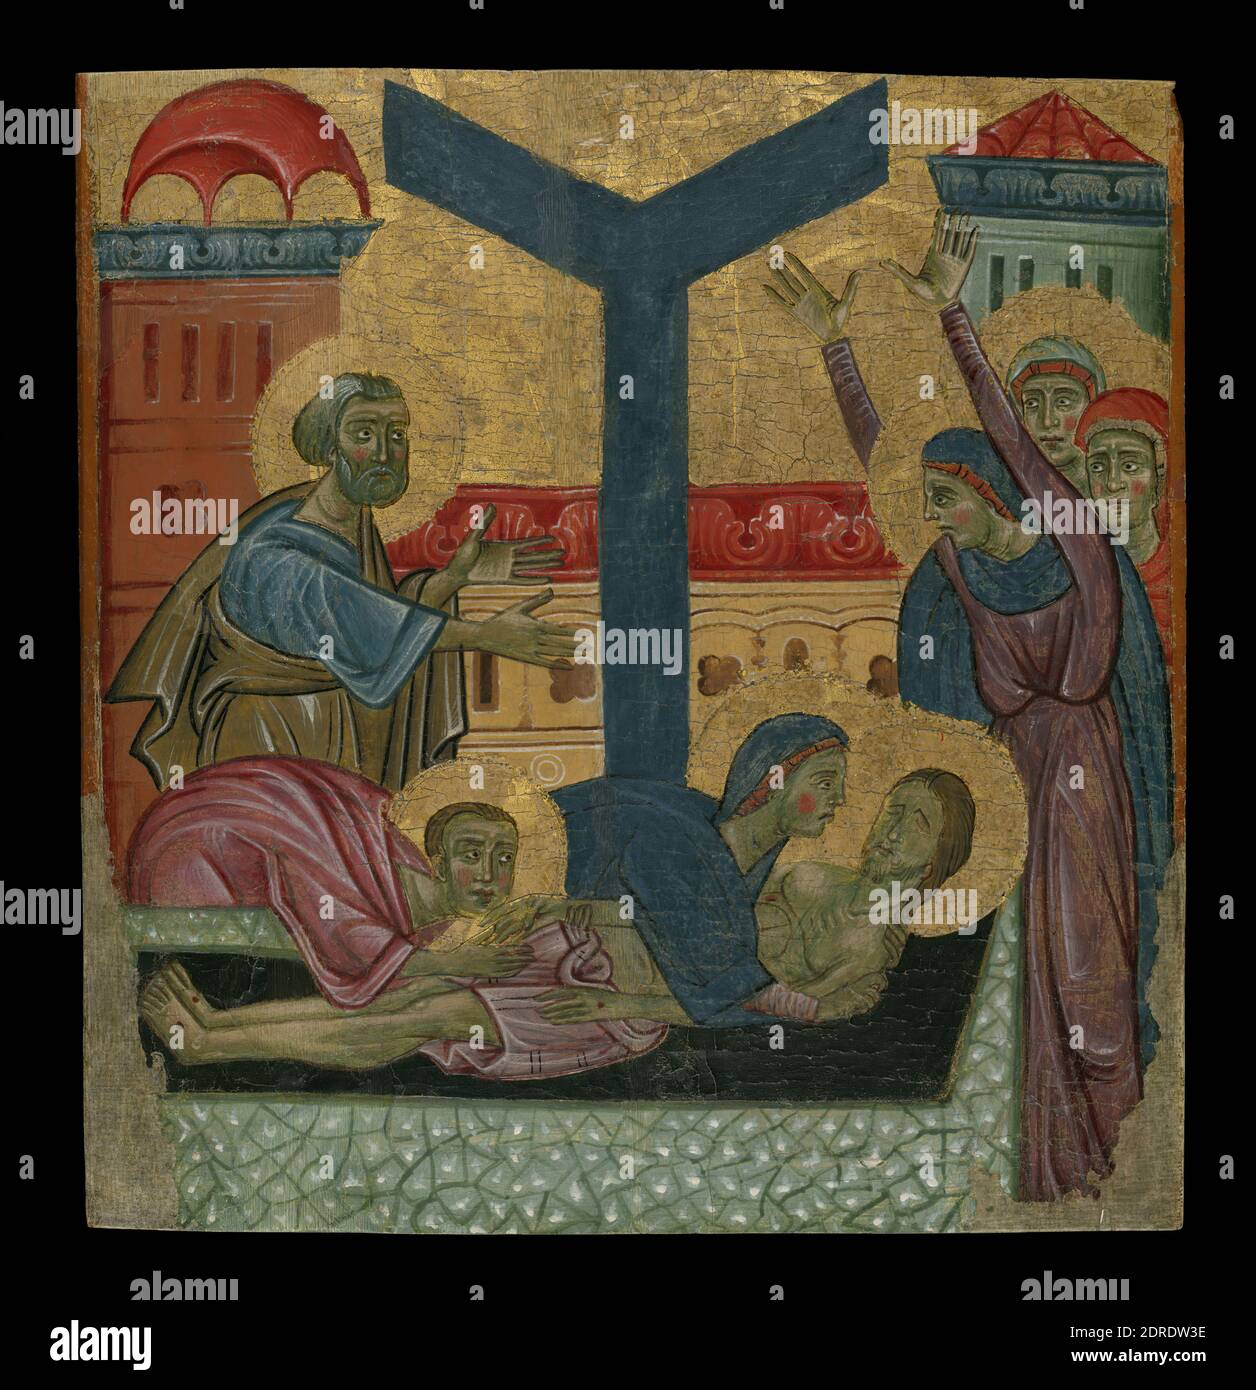 Artist, circle of: Bonaventura Berlinghieri, Italian, Lucca, active 1228–1274, The Lamentation over the Dead Christ, ca. 1230, Tempera on panel, 37.2 × 36 cm (14 5/8 × 14 3/16 in.), On view, Italian, Lucca, 13th century, Paintings Stock Photo